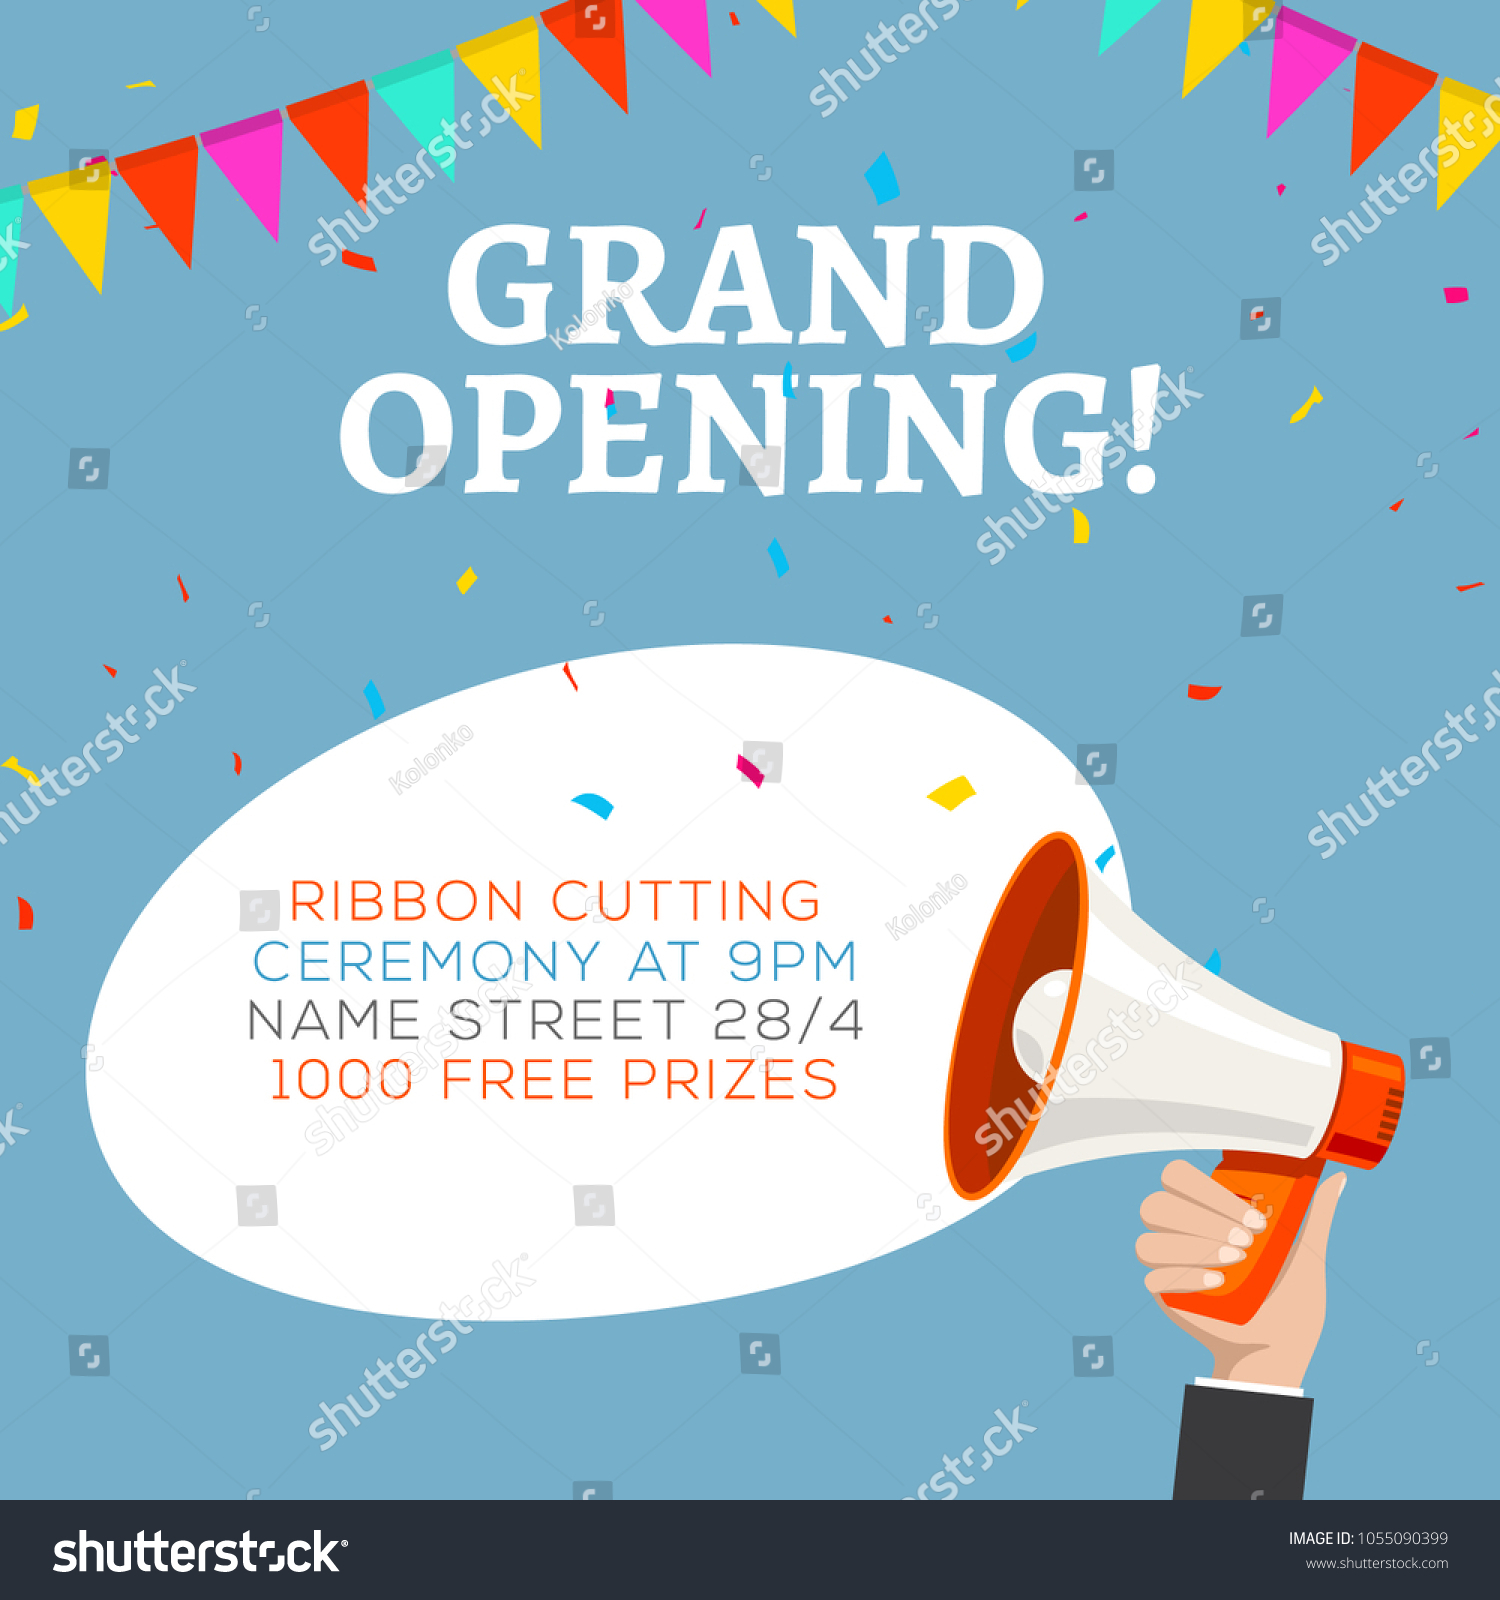 Grand Opening Flyer Banner Template Marketing Stock Vector With Regard To Grand Opening Flyer Template Free